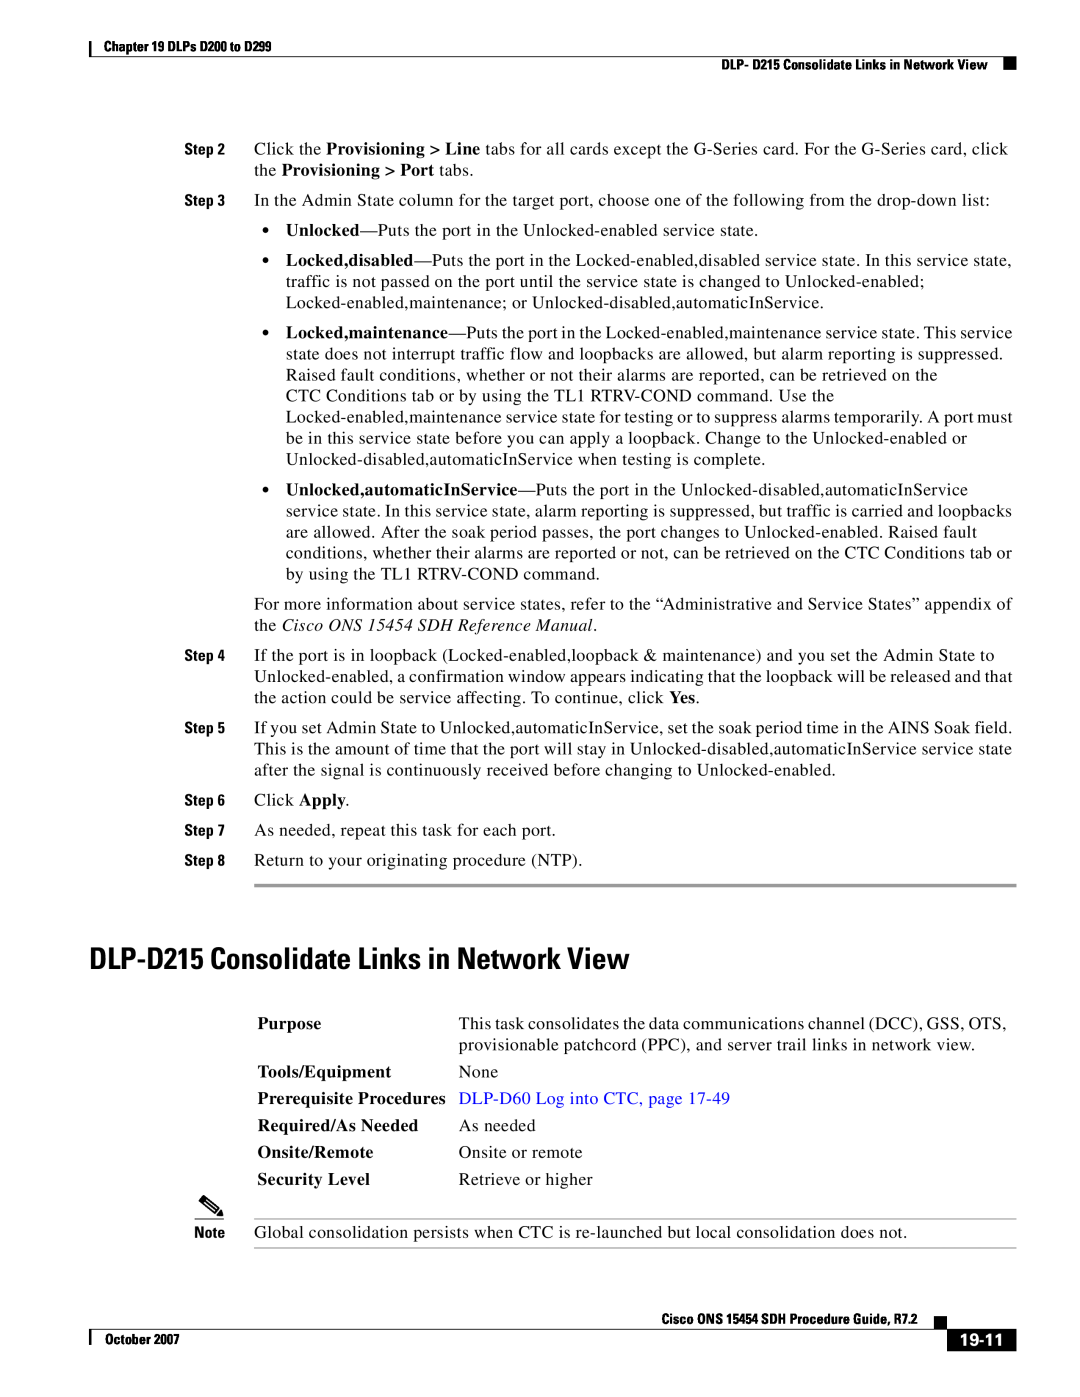 Cisco Systems D200 manual DLP-D215 Consolidate Links in Network View, the Cisco ONS 15454 SDH Reference Manual, 19-11 